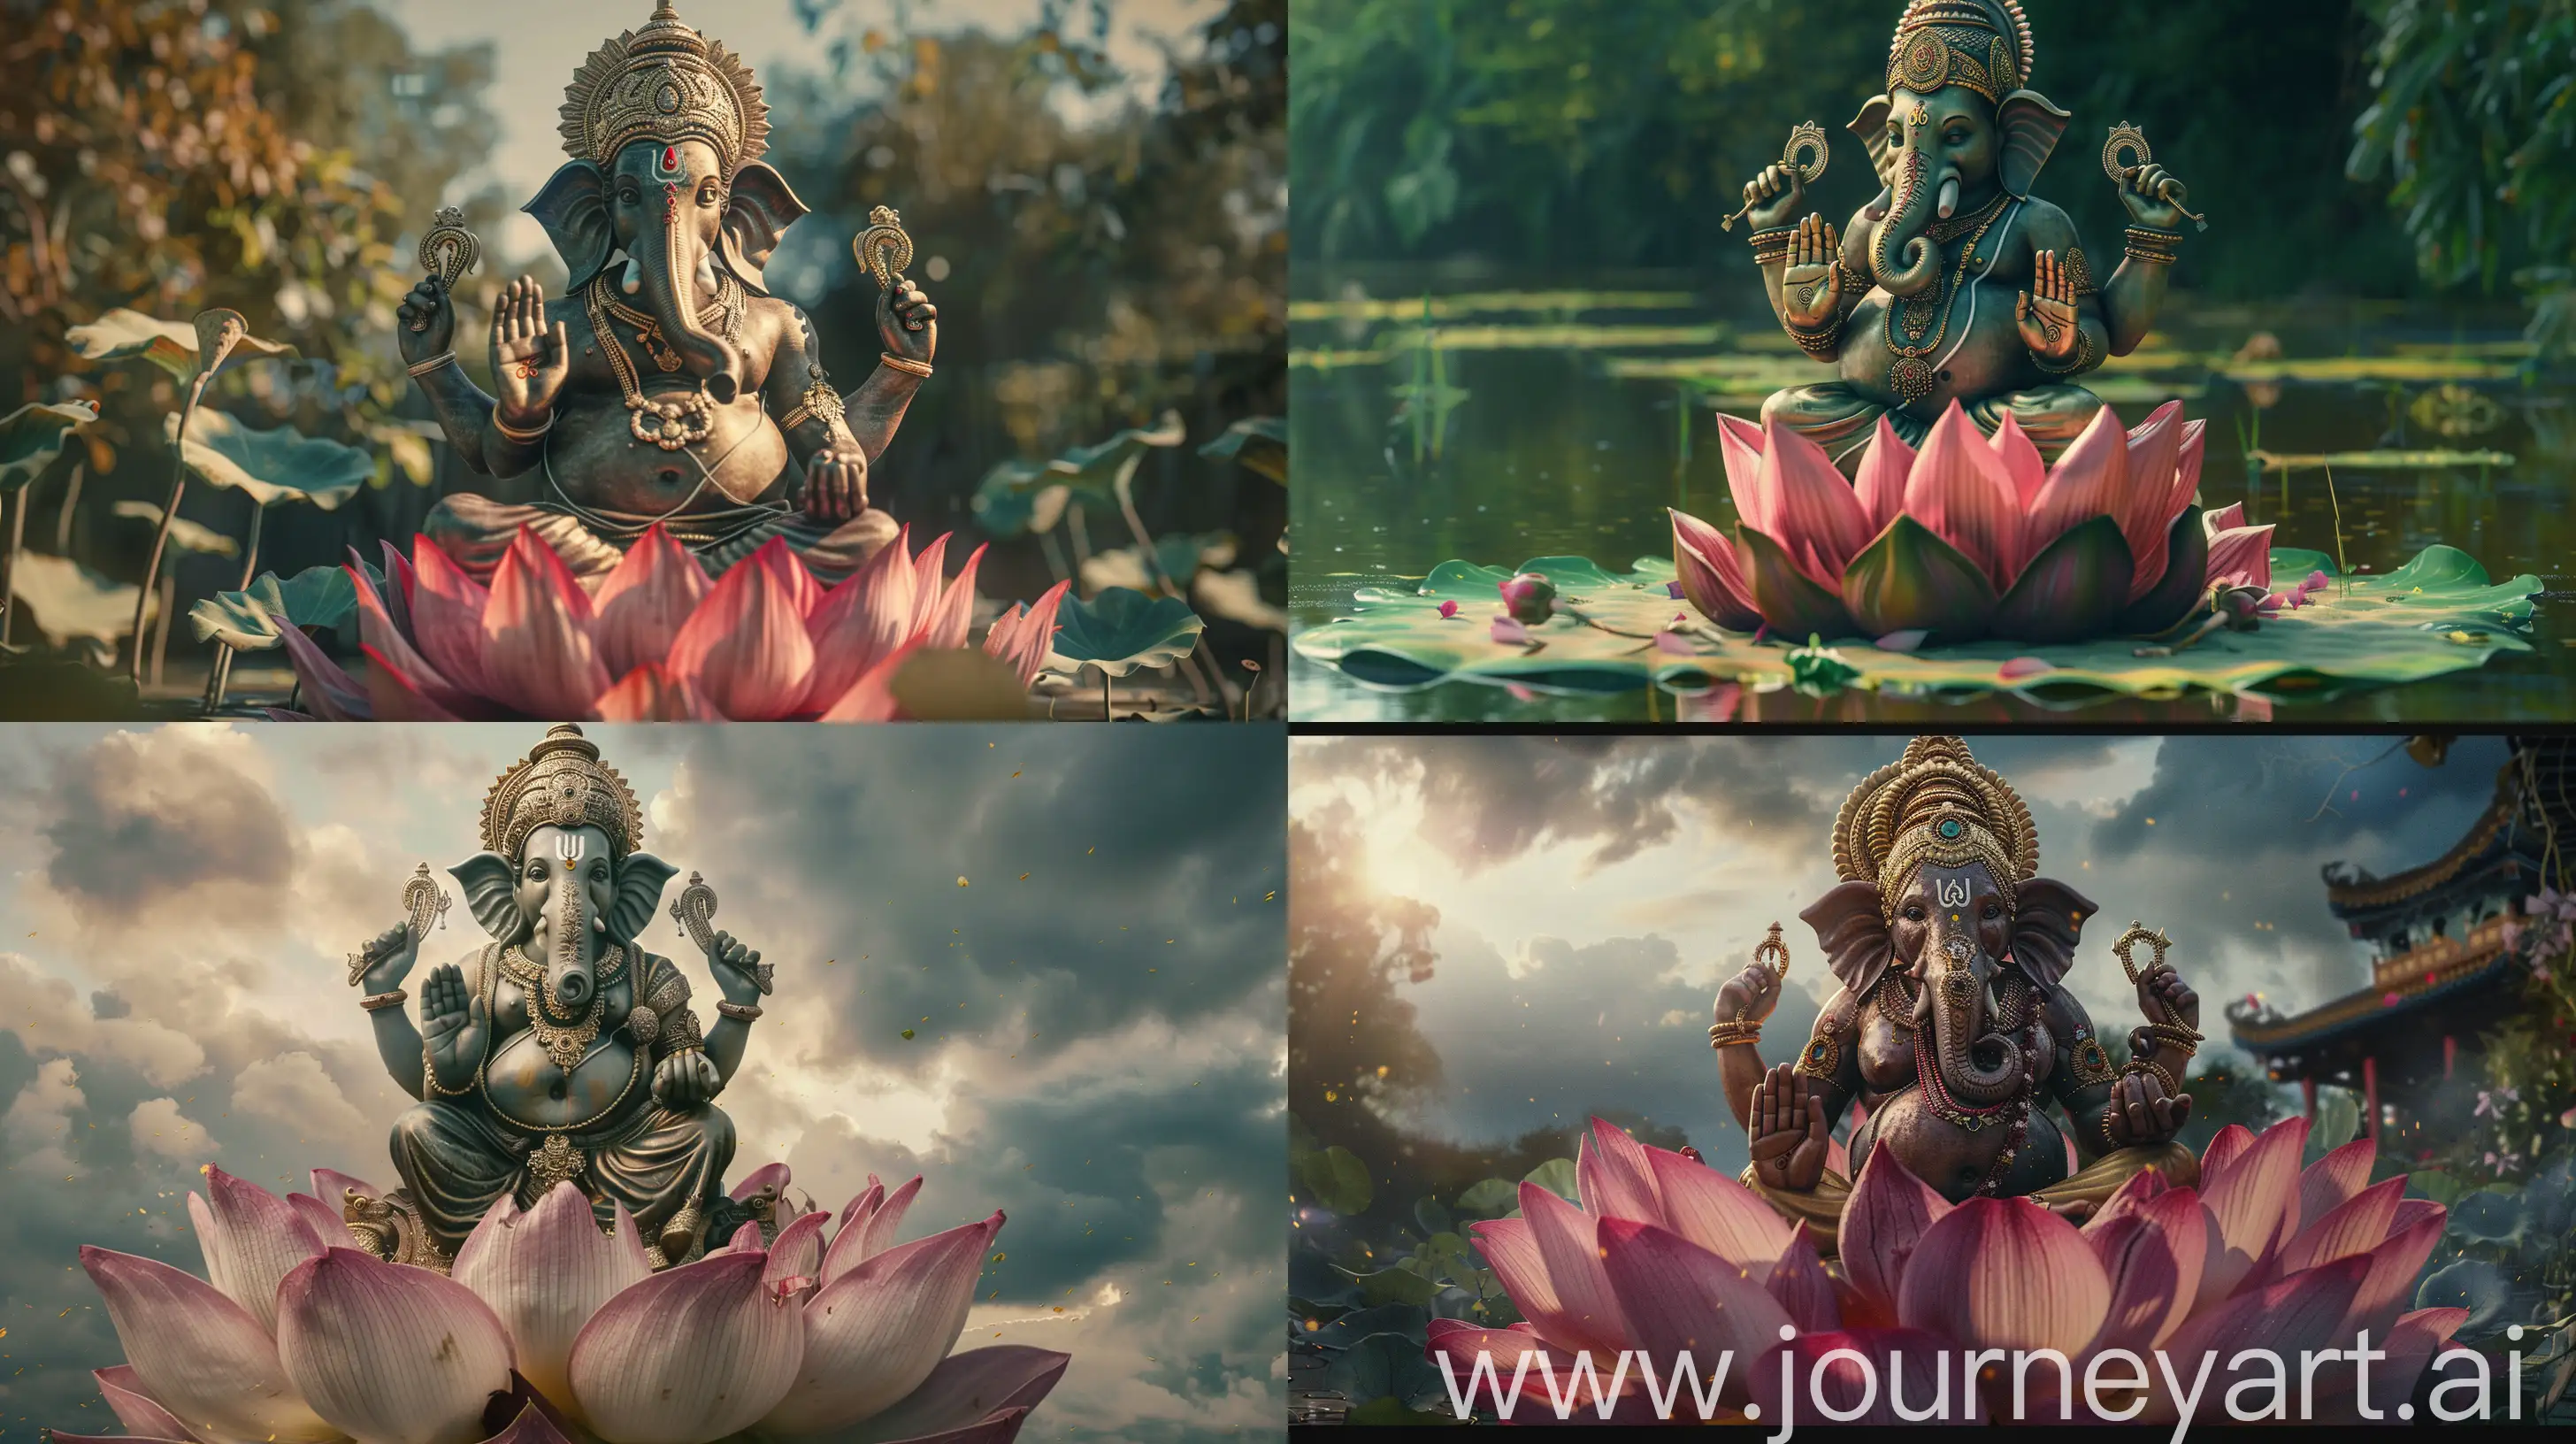 Cinematic-Ultra-Realist-Depiction-of-Ganesha-Seated-on-a-Giant-Lotus-Flower